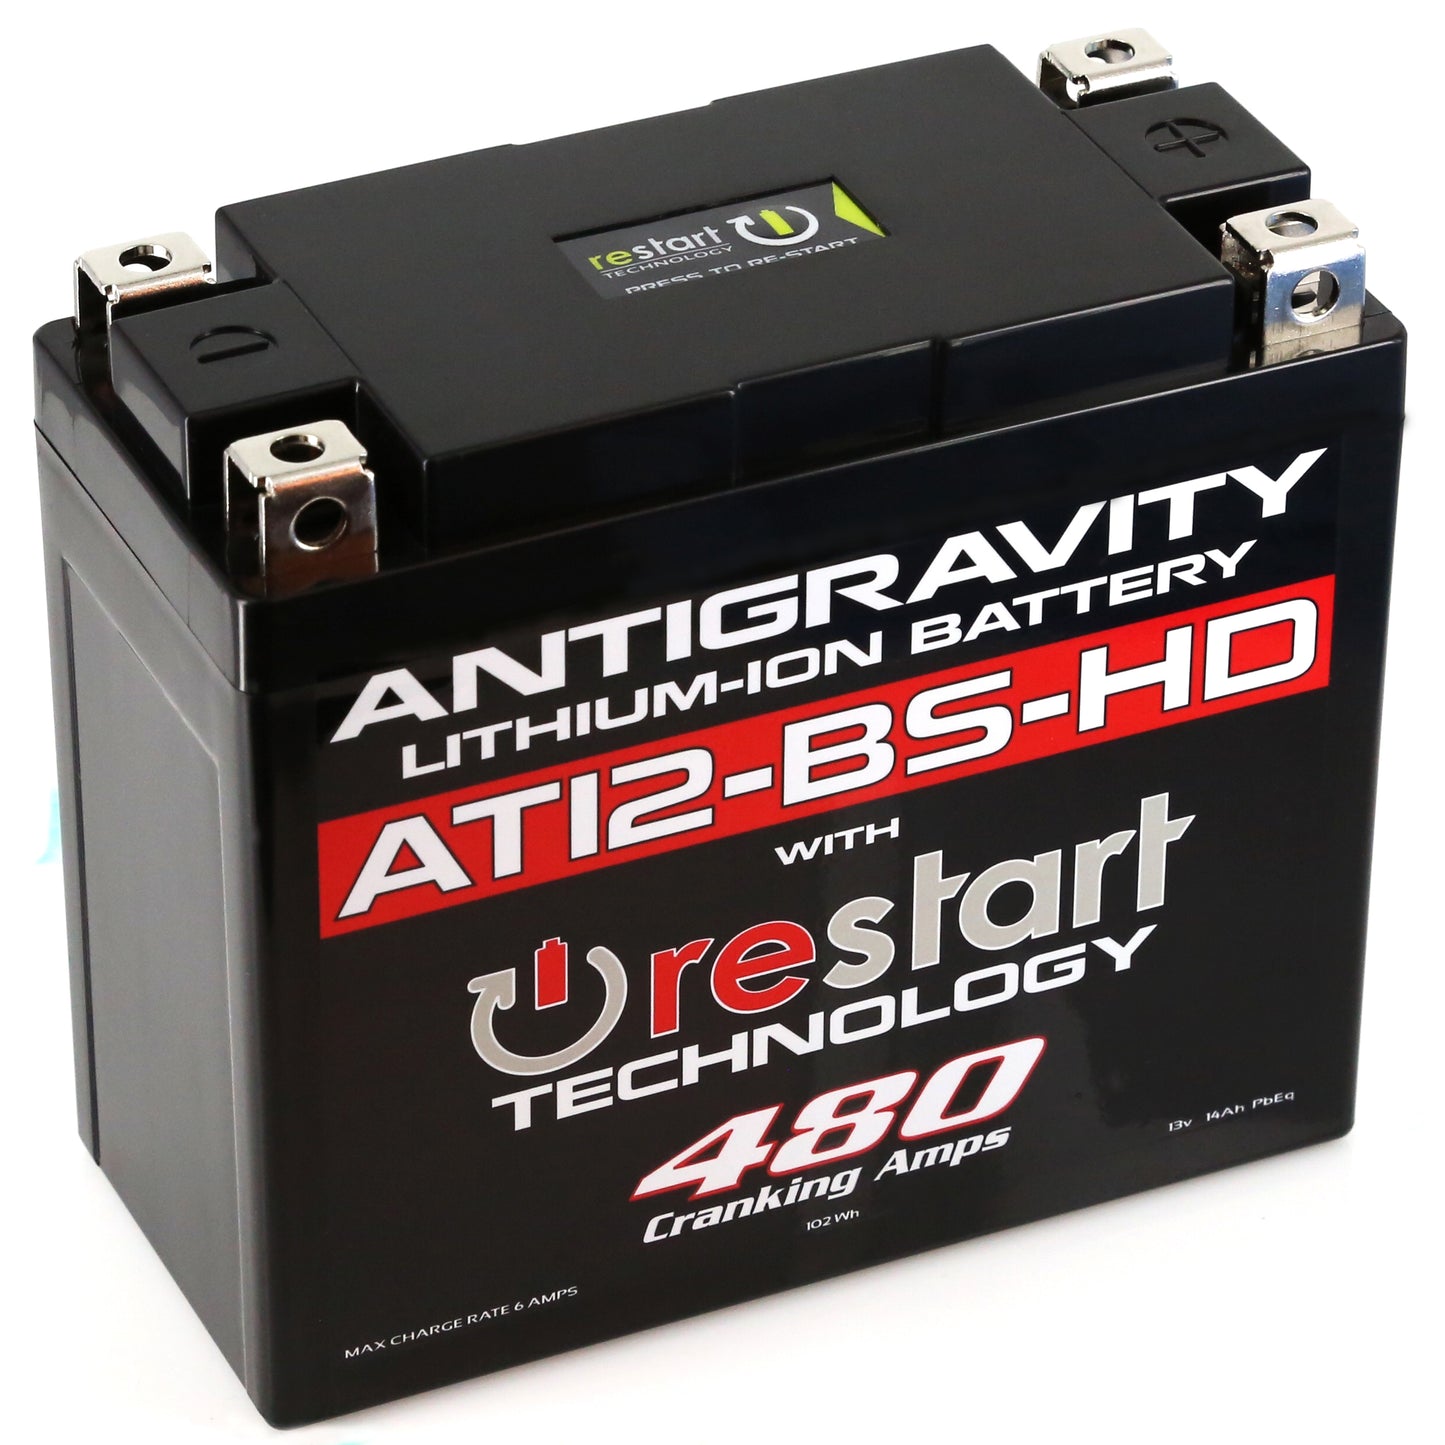 Lithium Battery AT12BS-HD-RS